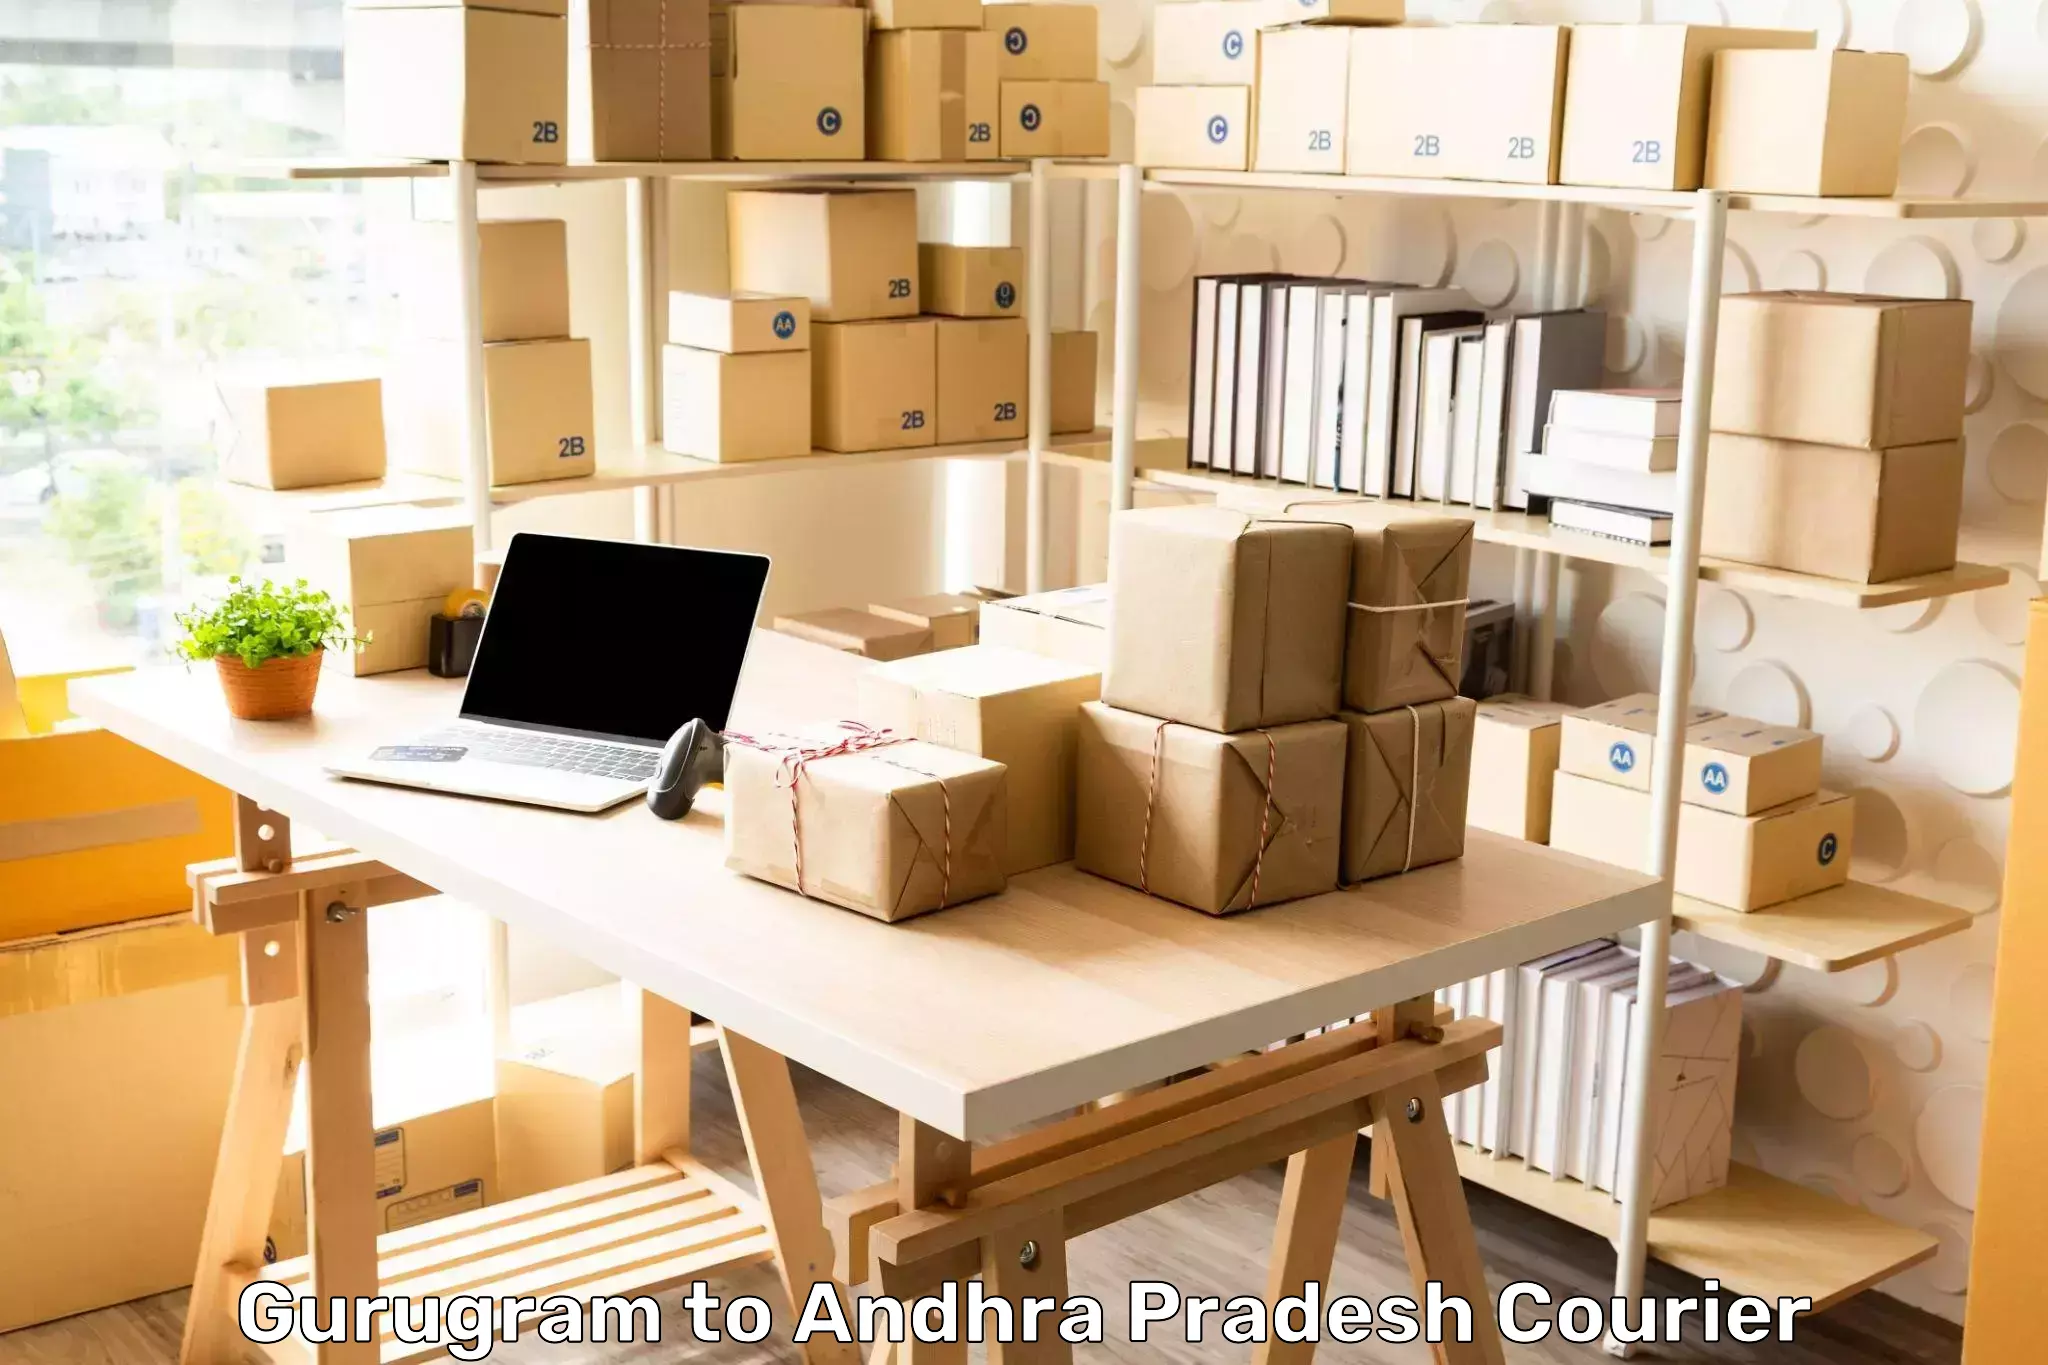 Business logistics support in Gurugram to Dhone